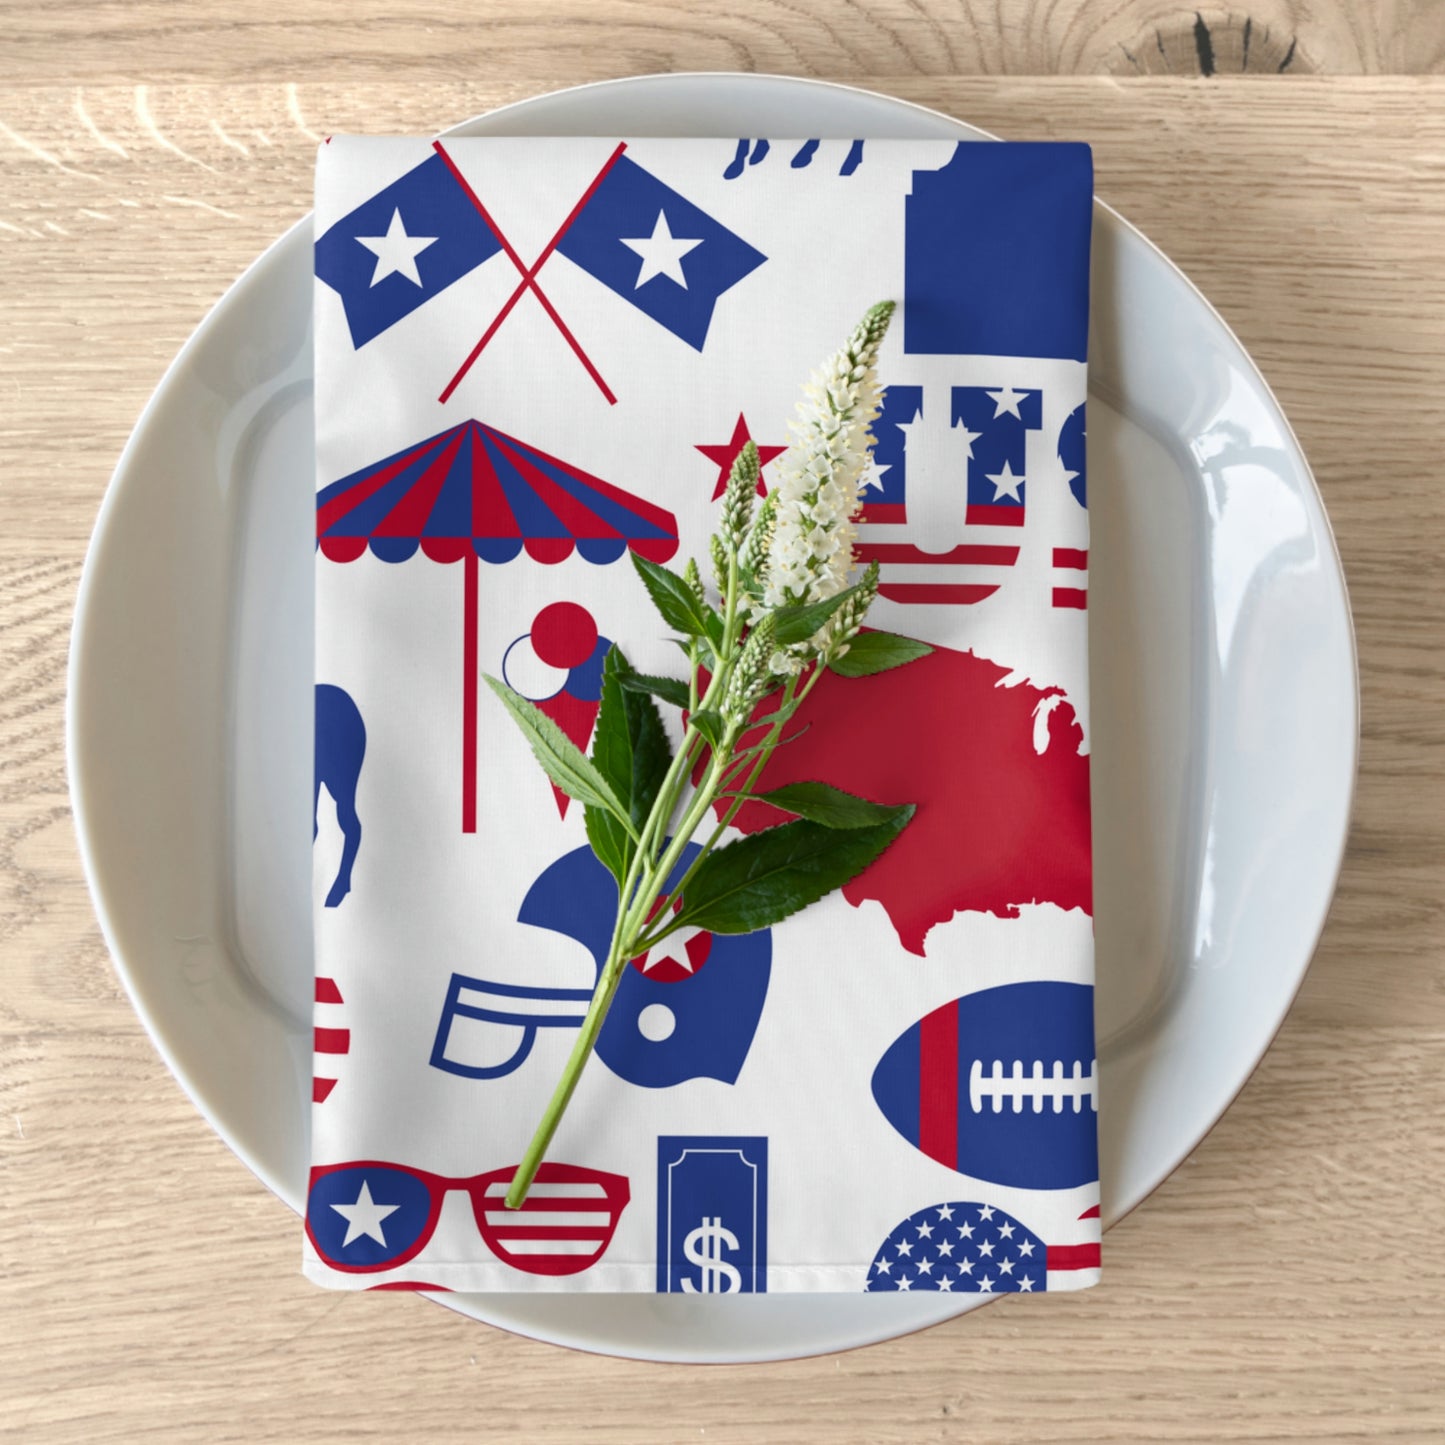 All American Red and Blue Napkins Set of Four